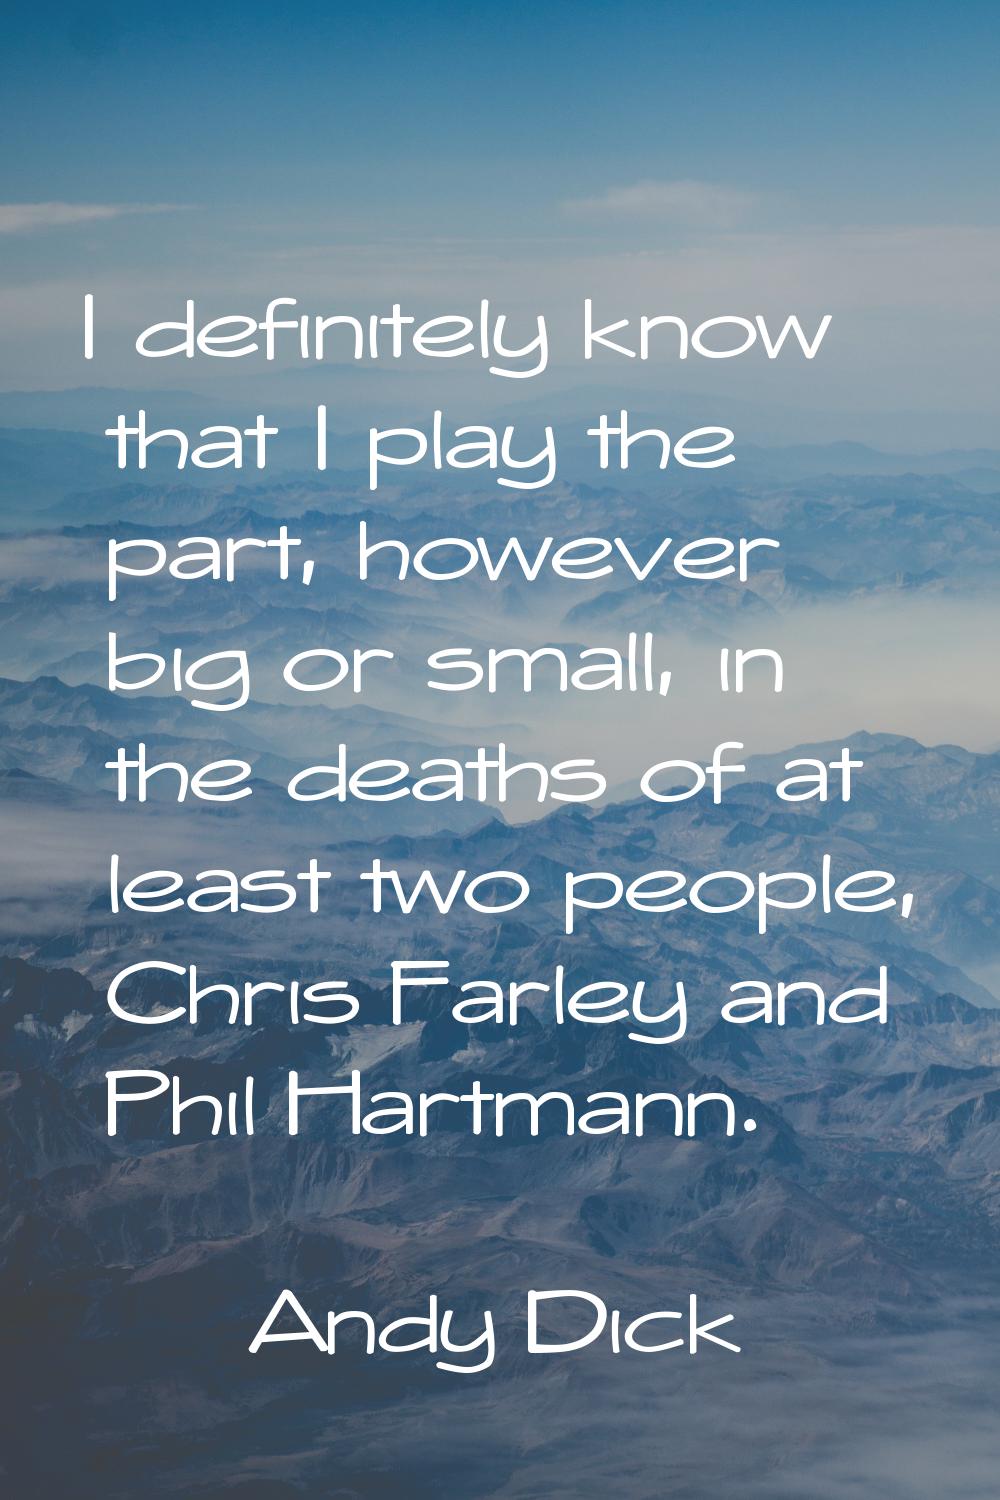 I definitely know that I play the part, however big or small, in the deaths of at least two people,